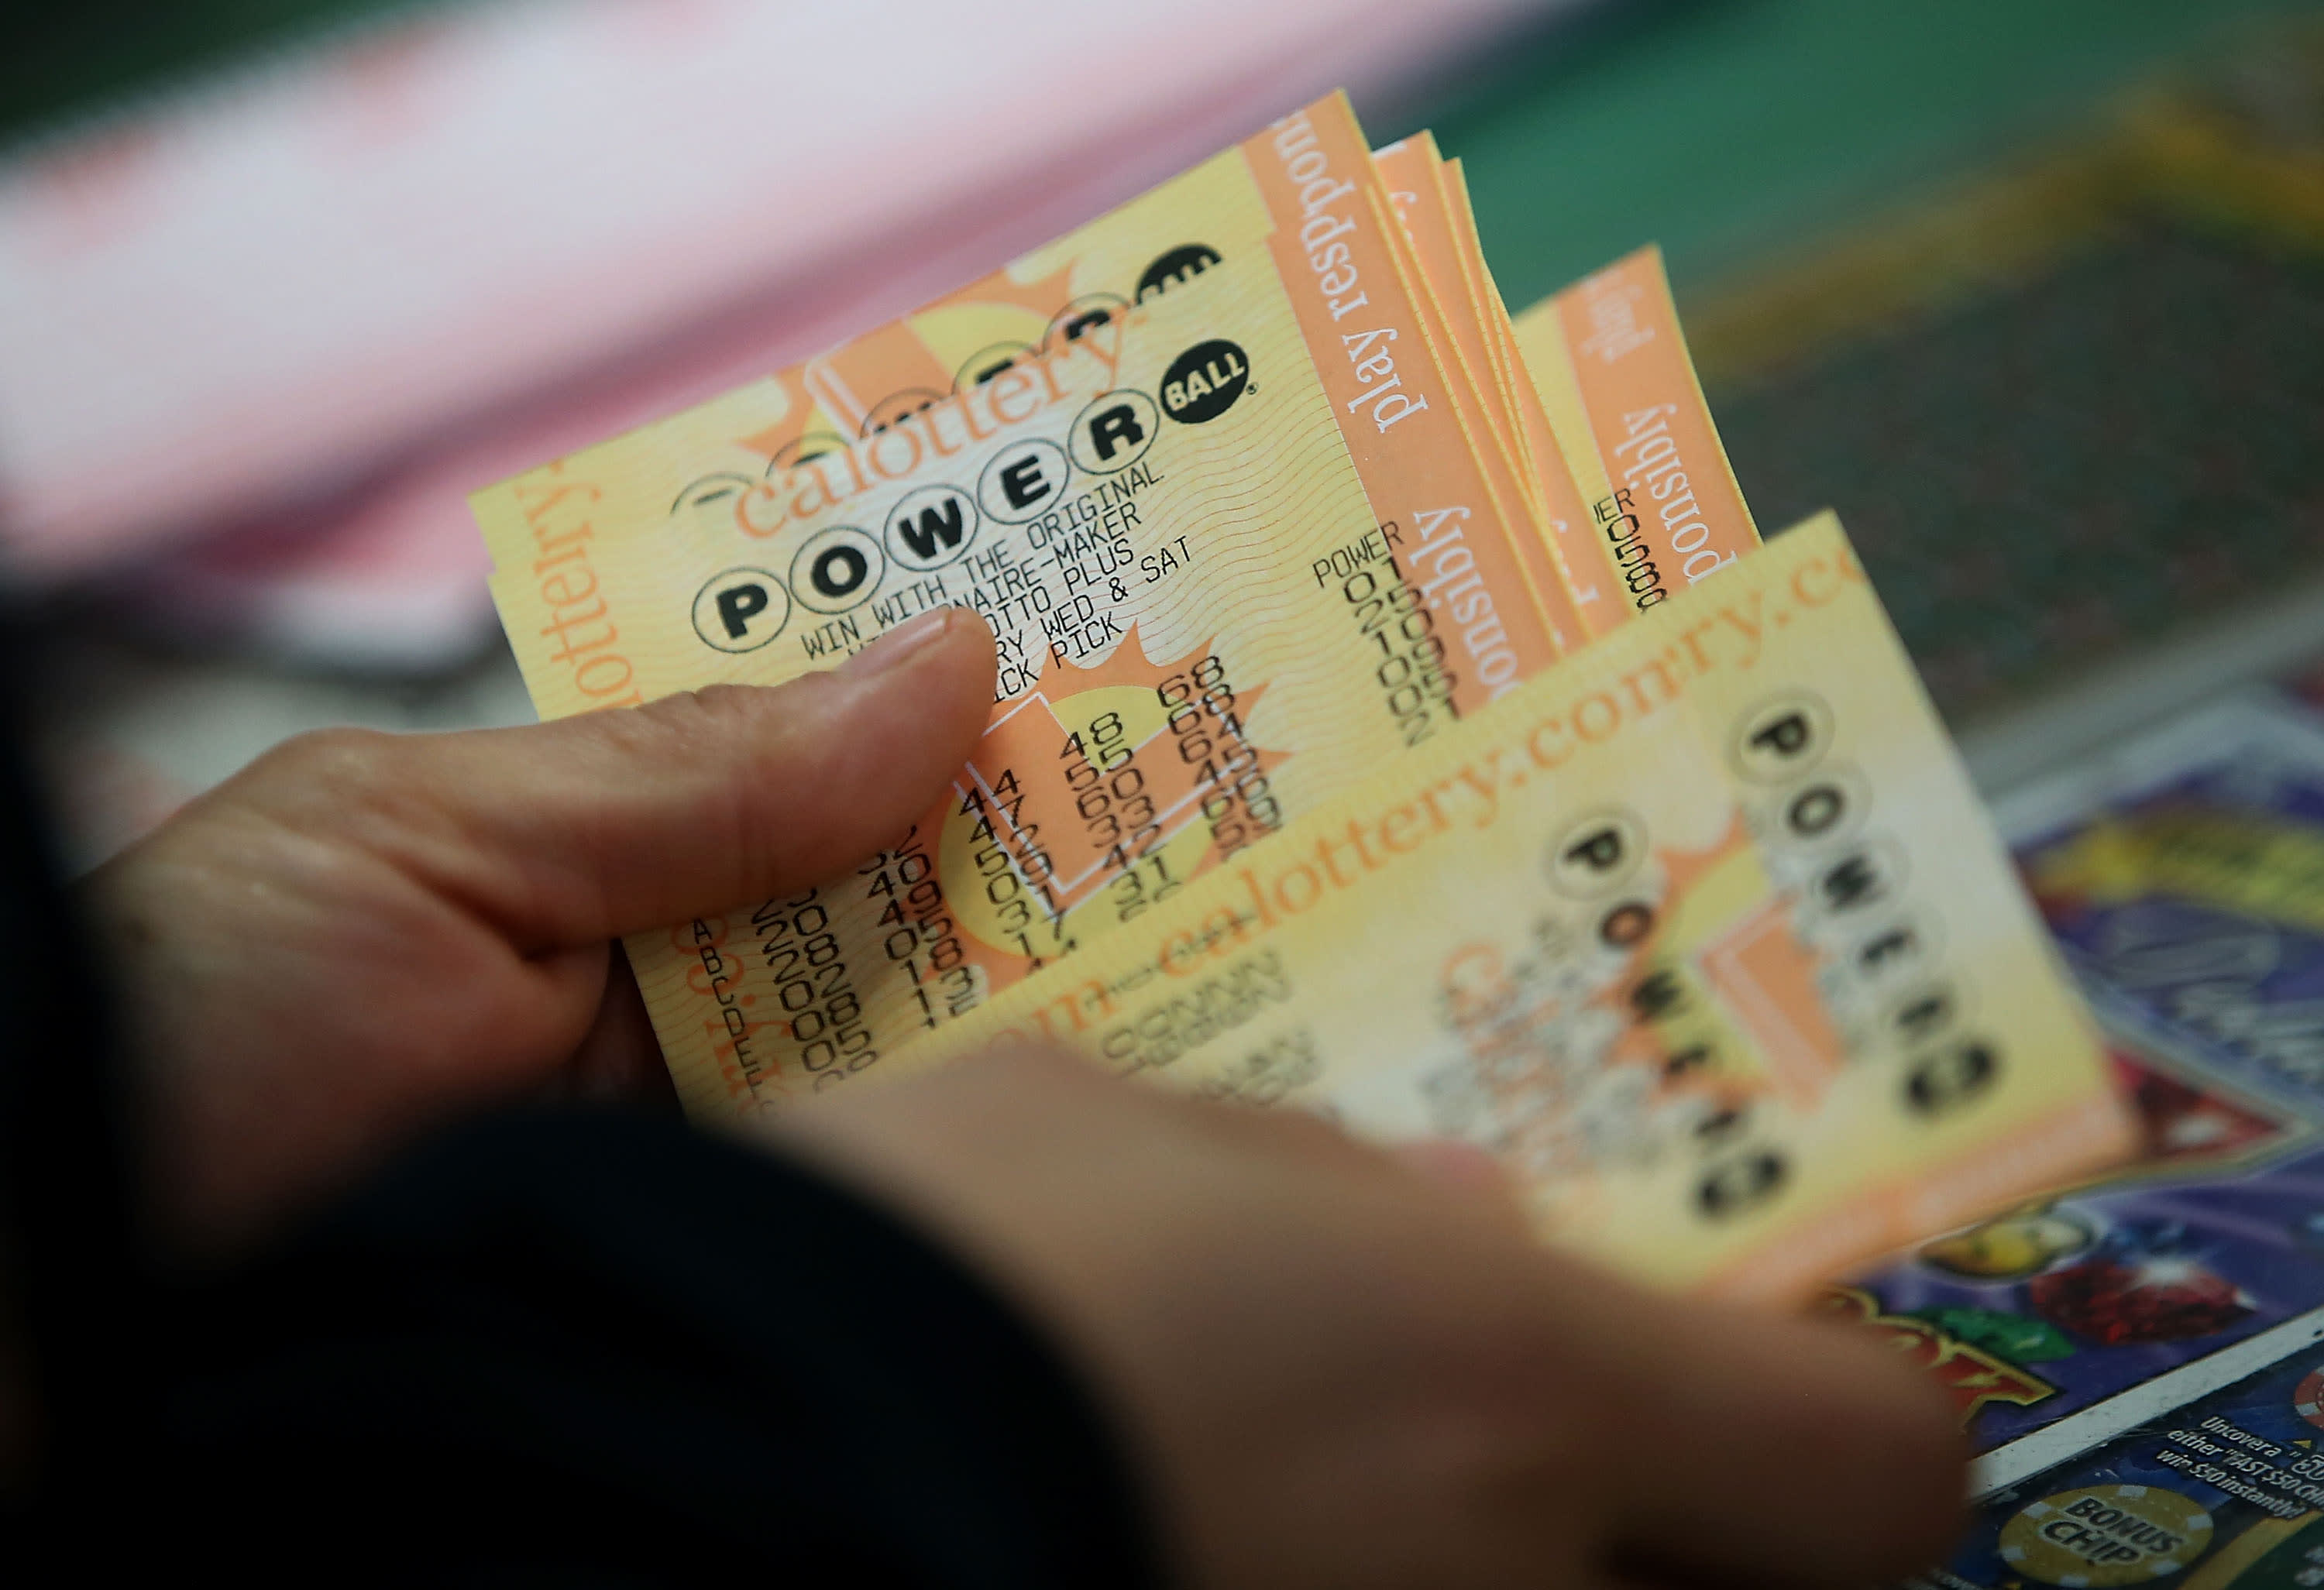 Powerball jackpot lottery: Powerball jackpot lottery numbers hit $1.73  billion-mark, Wednesday's drawing to be 2nd-largest US lottery prize - The  Economic Times